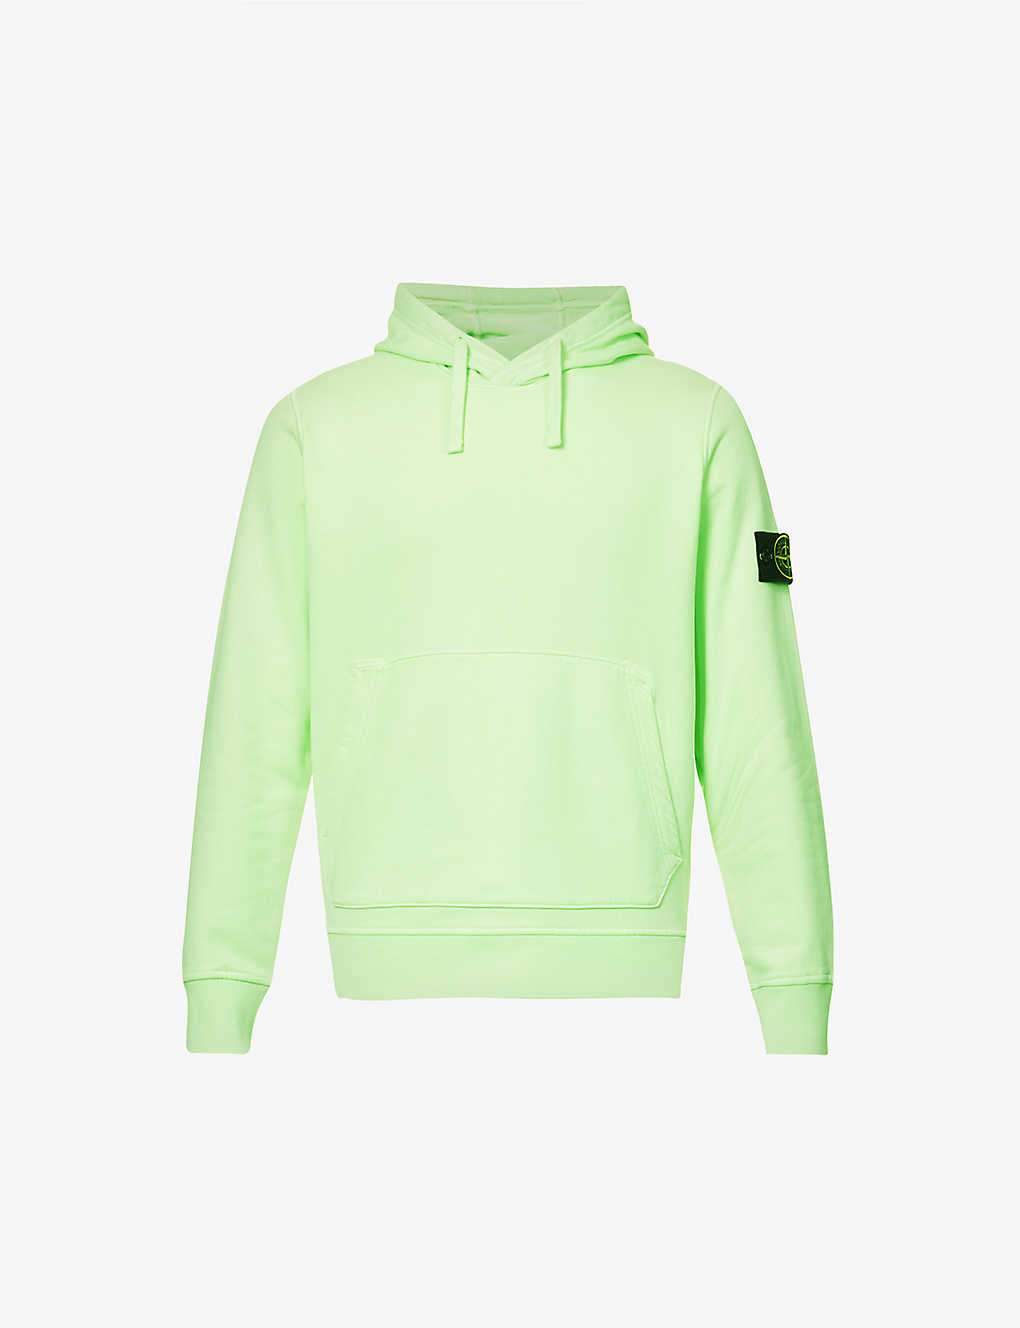 STONE ISLAND STONE ISLAND MEN'S LIGHT GREEN BRAND-BADGE RELAXED-FIT COTTON-JERSEY HOODY,65433158